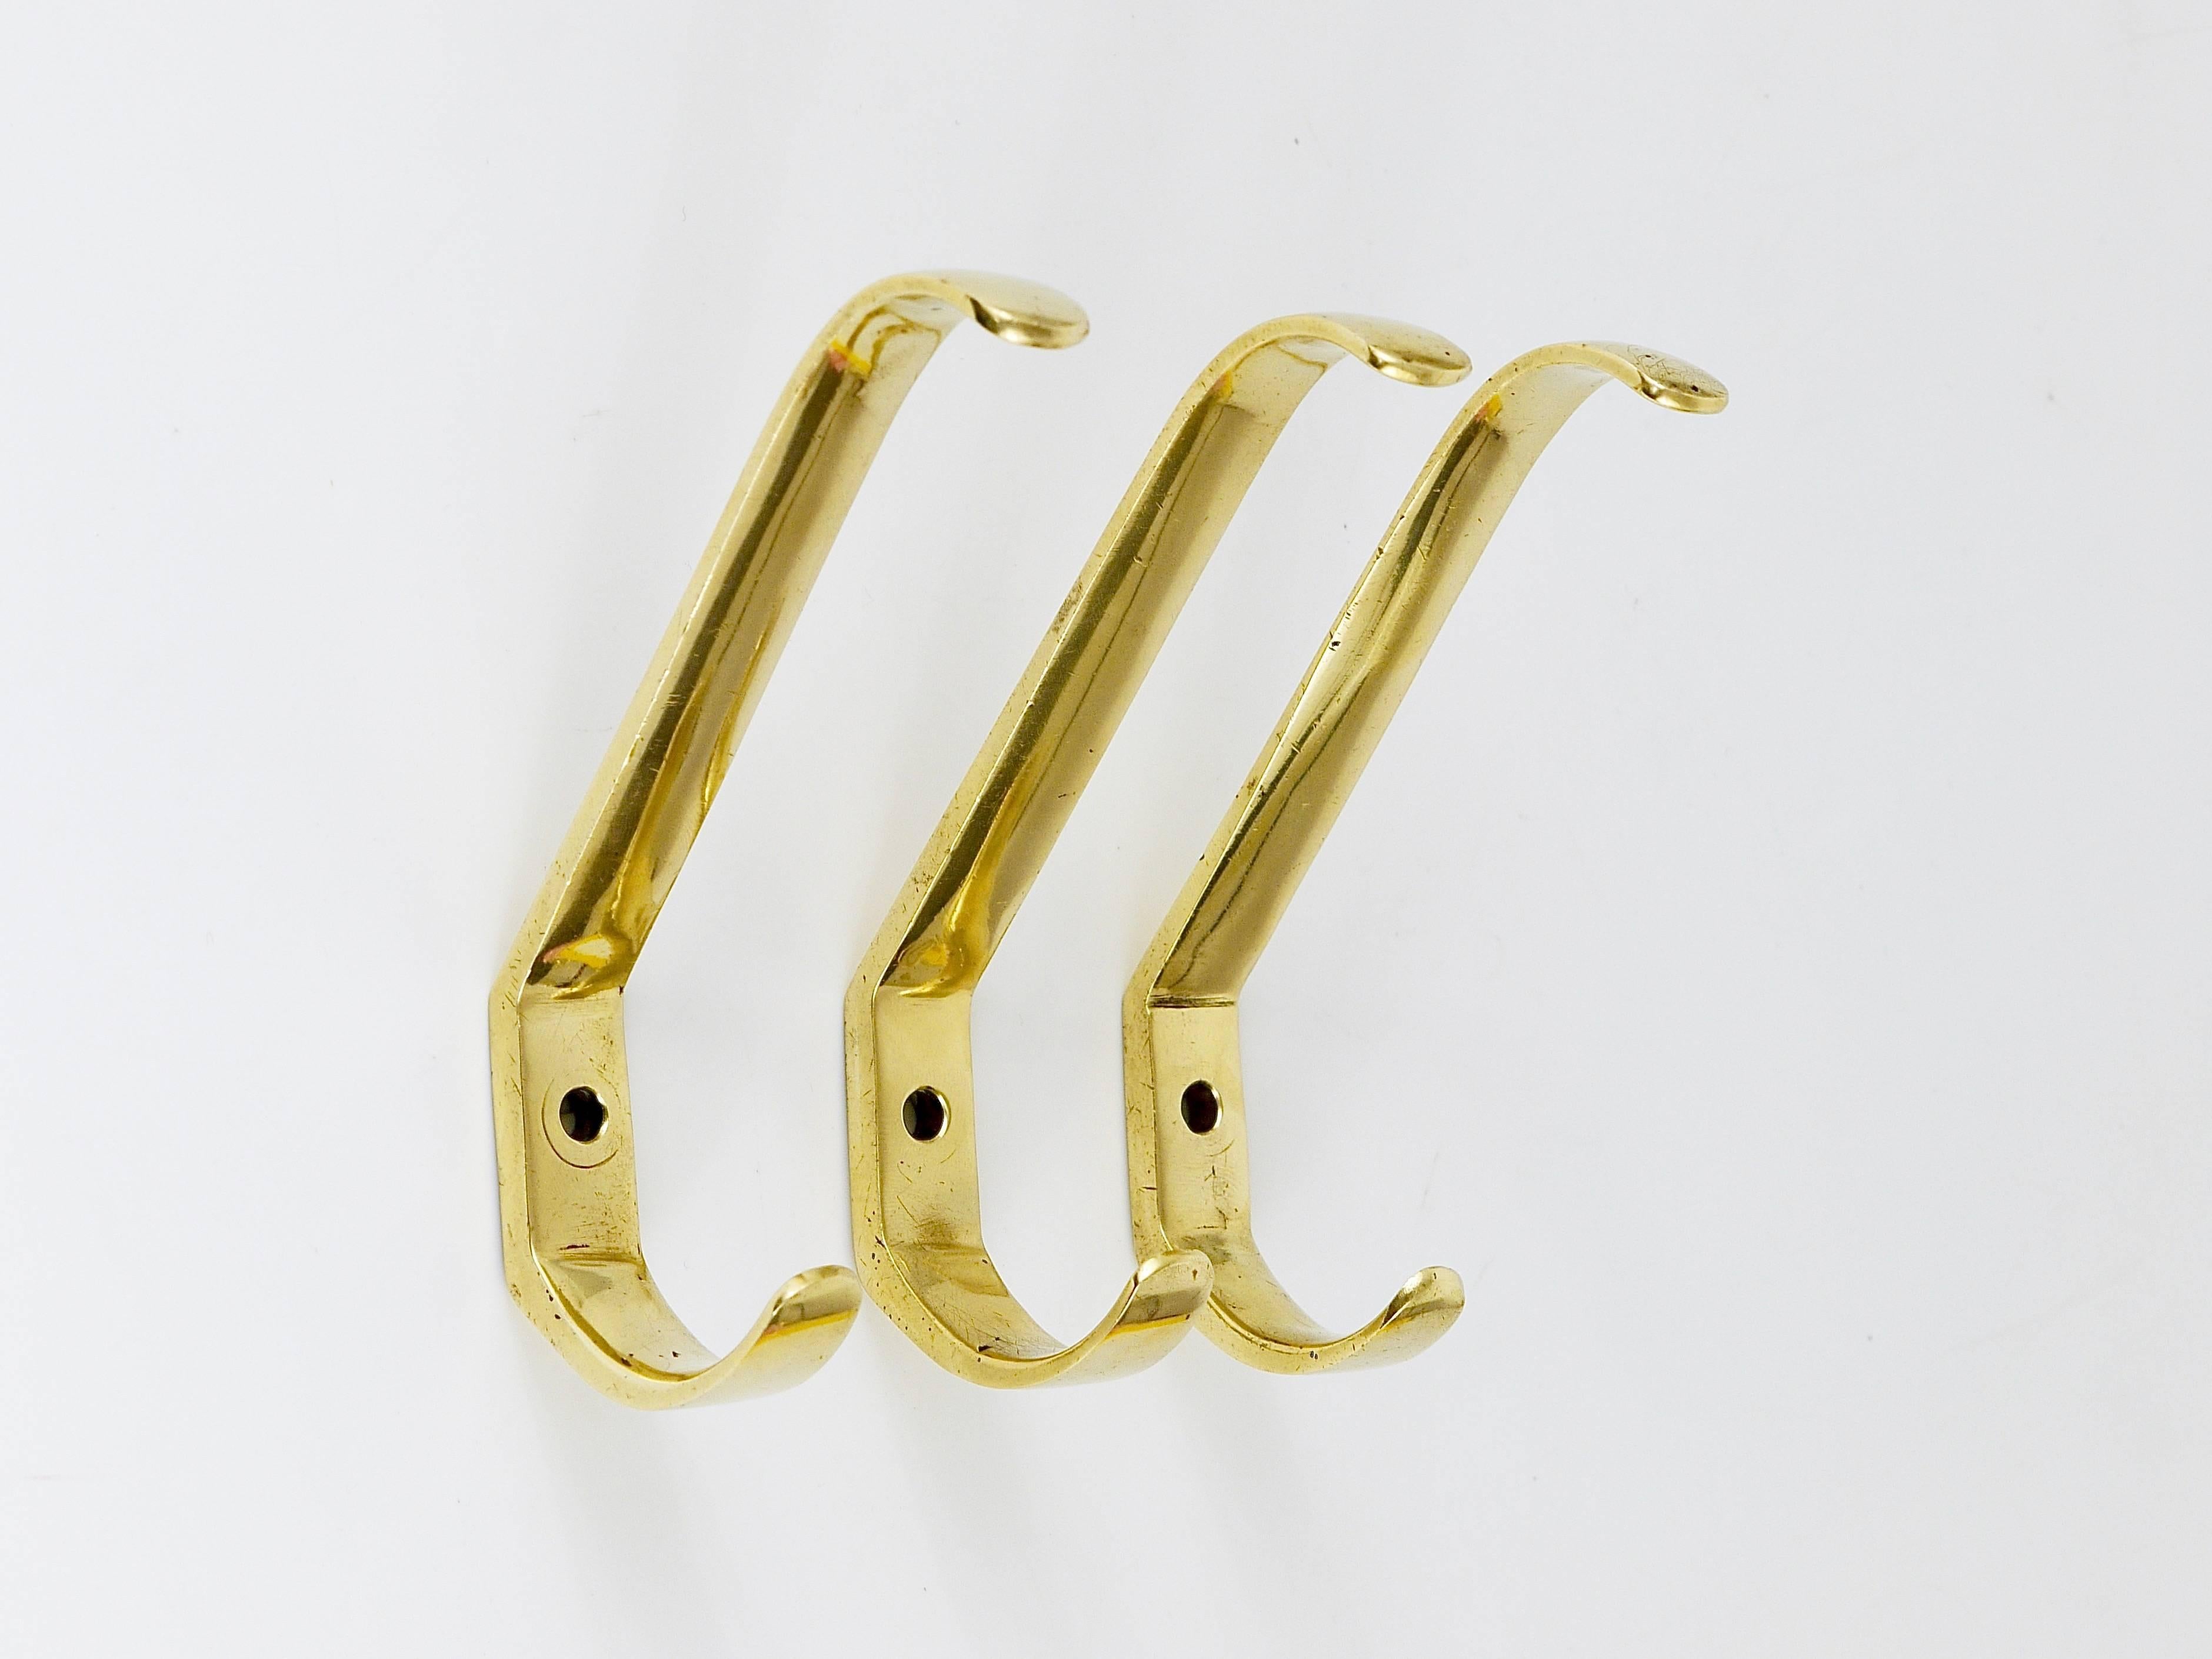 A set of three beautiful brass wall hooks, executed in the 1950s by Hertha Baller, Austria. Gently polished by hand, in very good condition with nice patina. The price is for the set of three hooks.